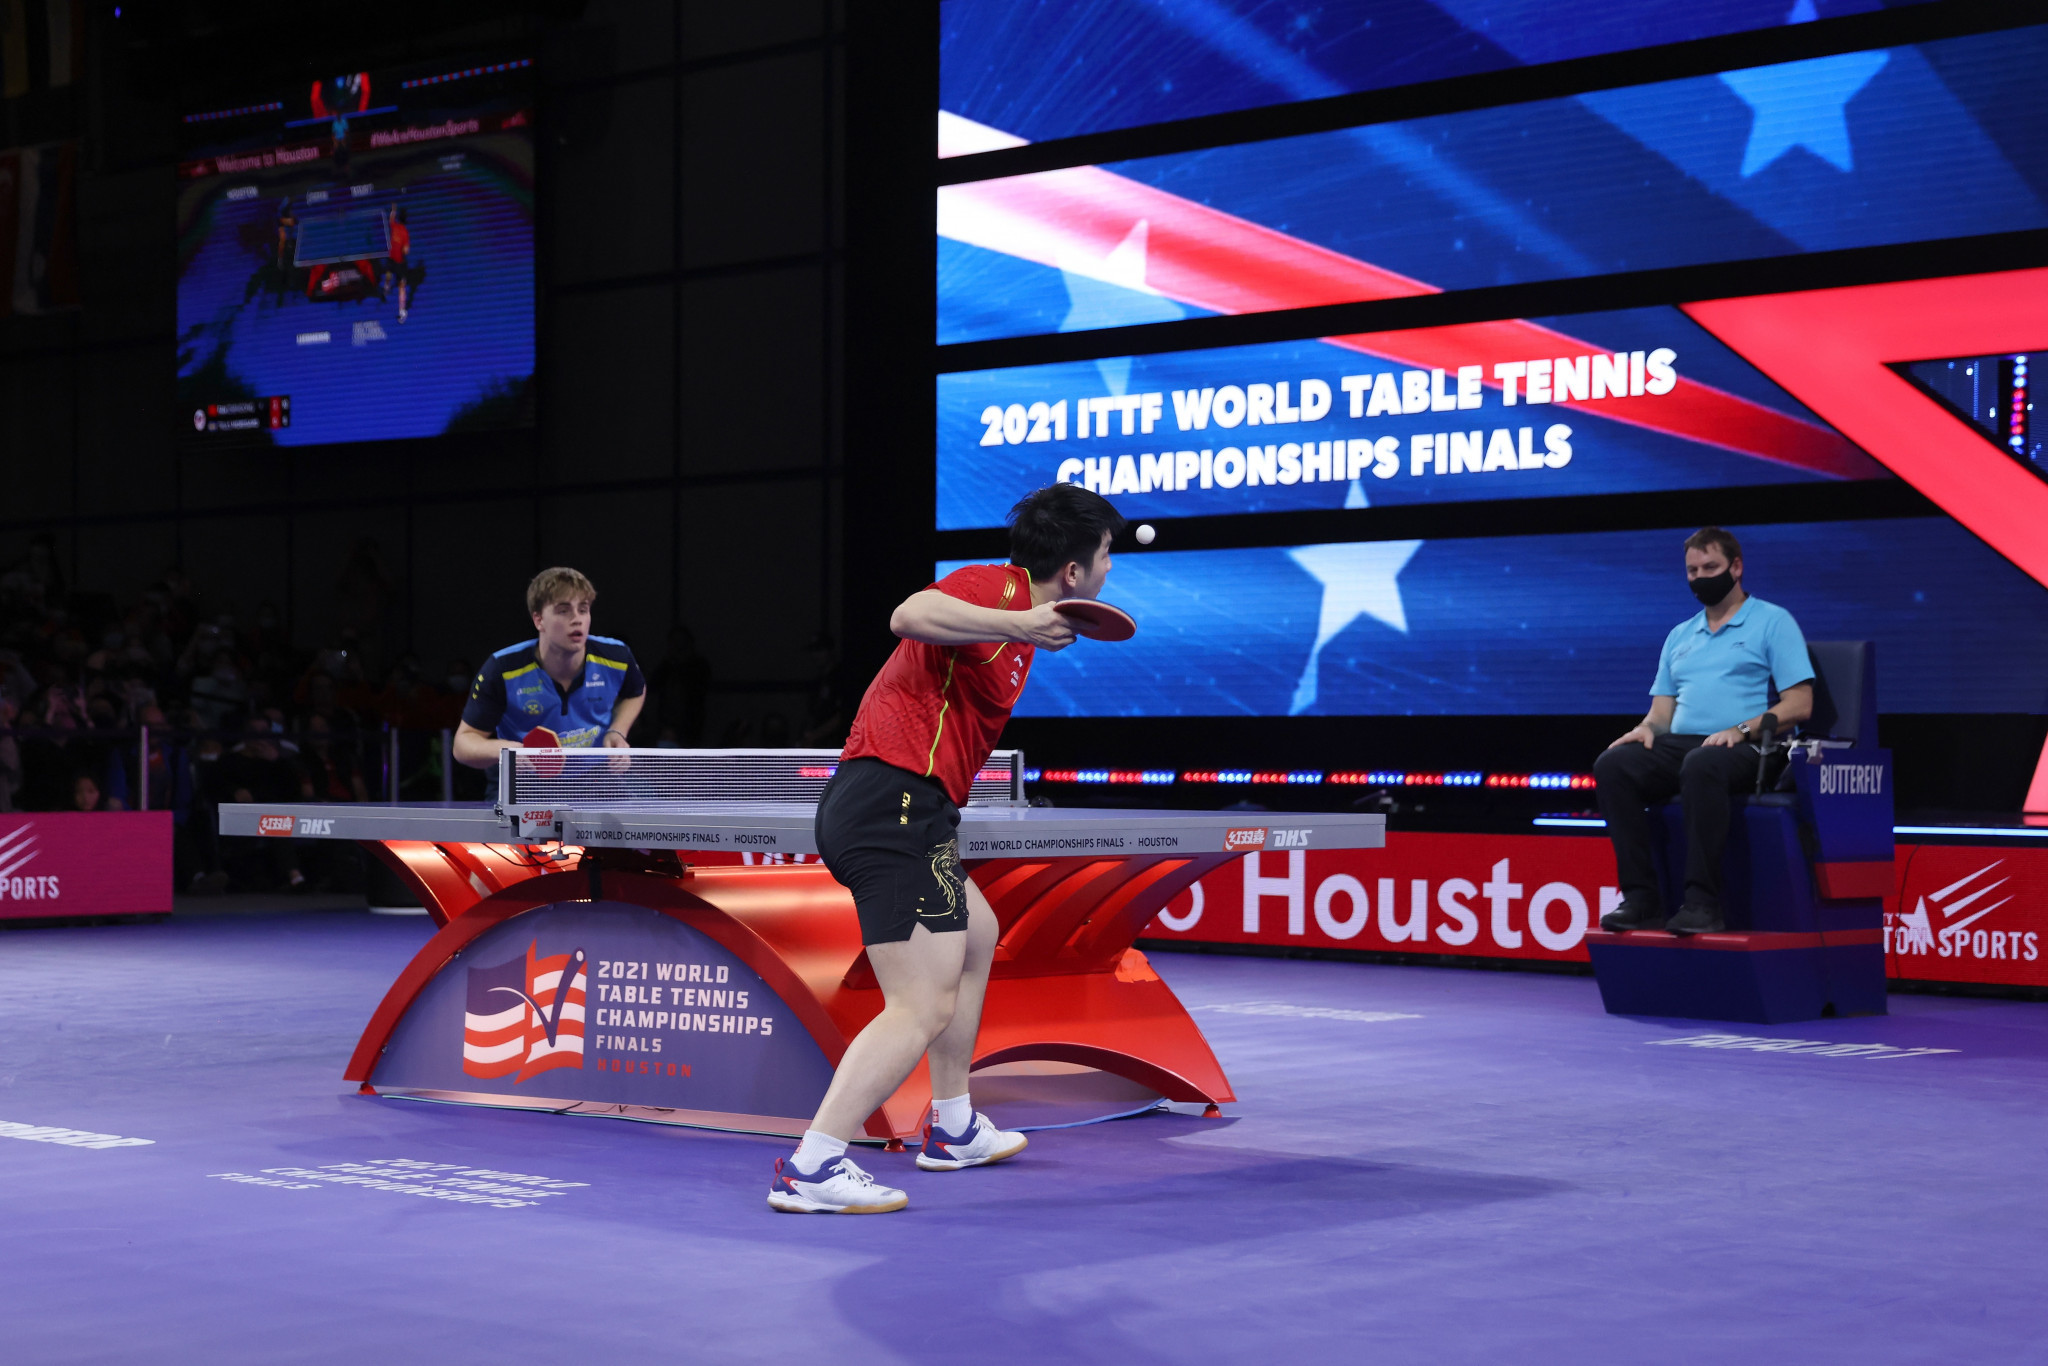 World number one Fan Zhendong of China serves against Sweden's Truls Moregard at the recent World Table Tennis Championships in Houston ©Getty Images